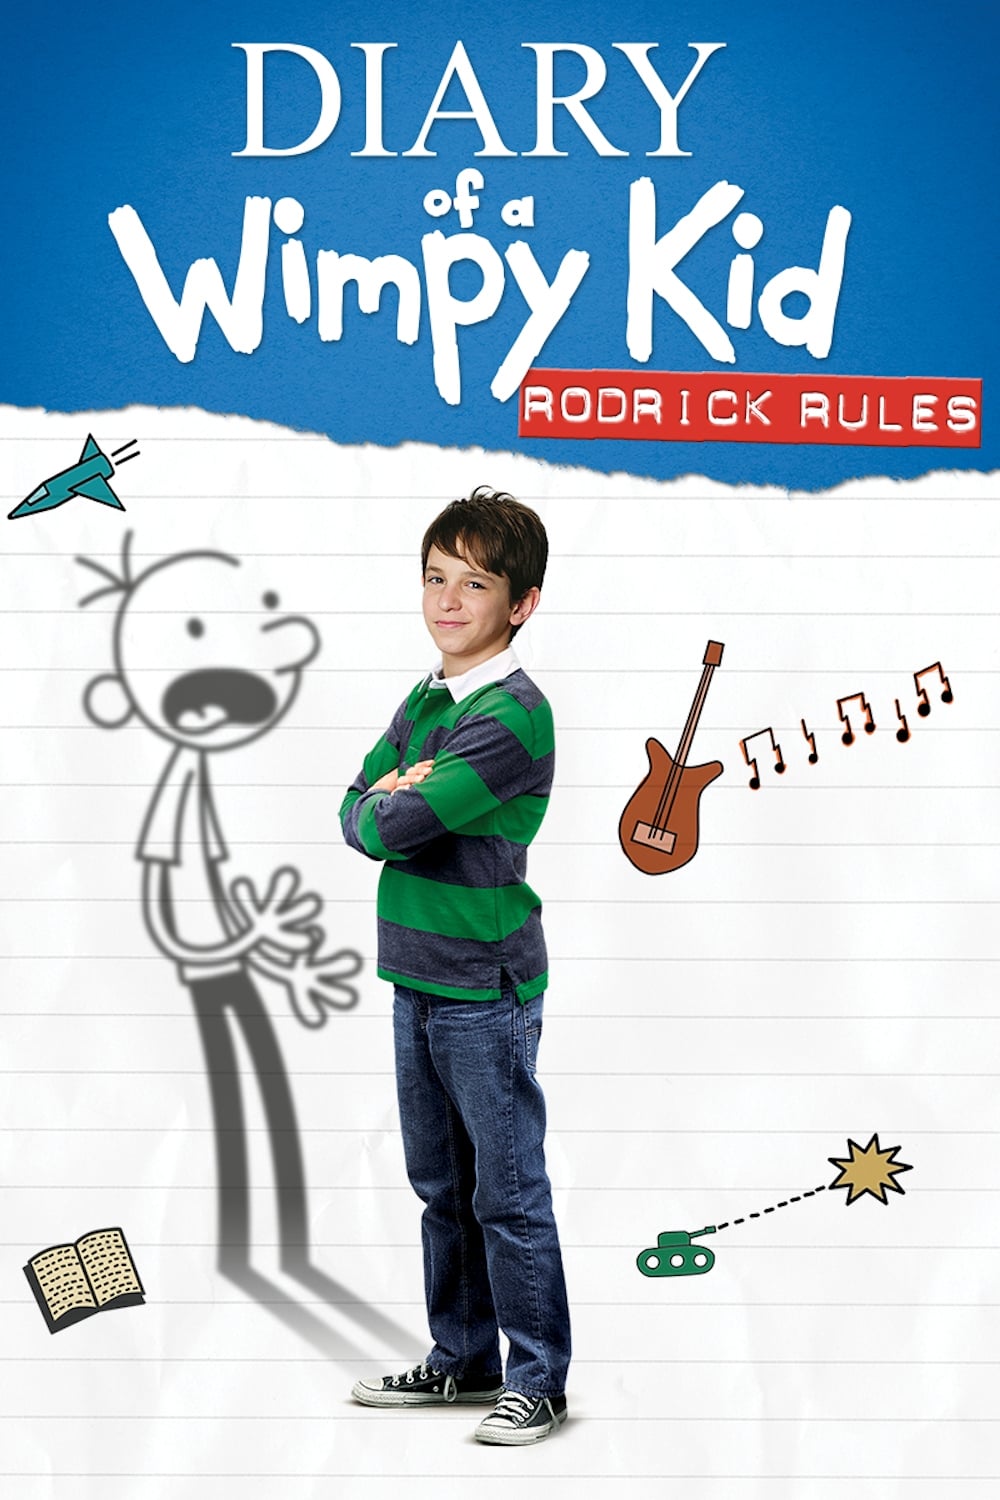 essay on diary of a wimpy kid rodrick rules